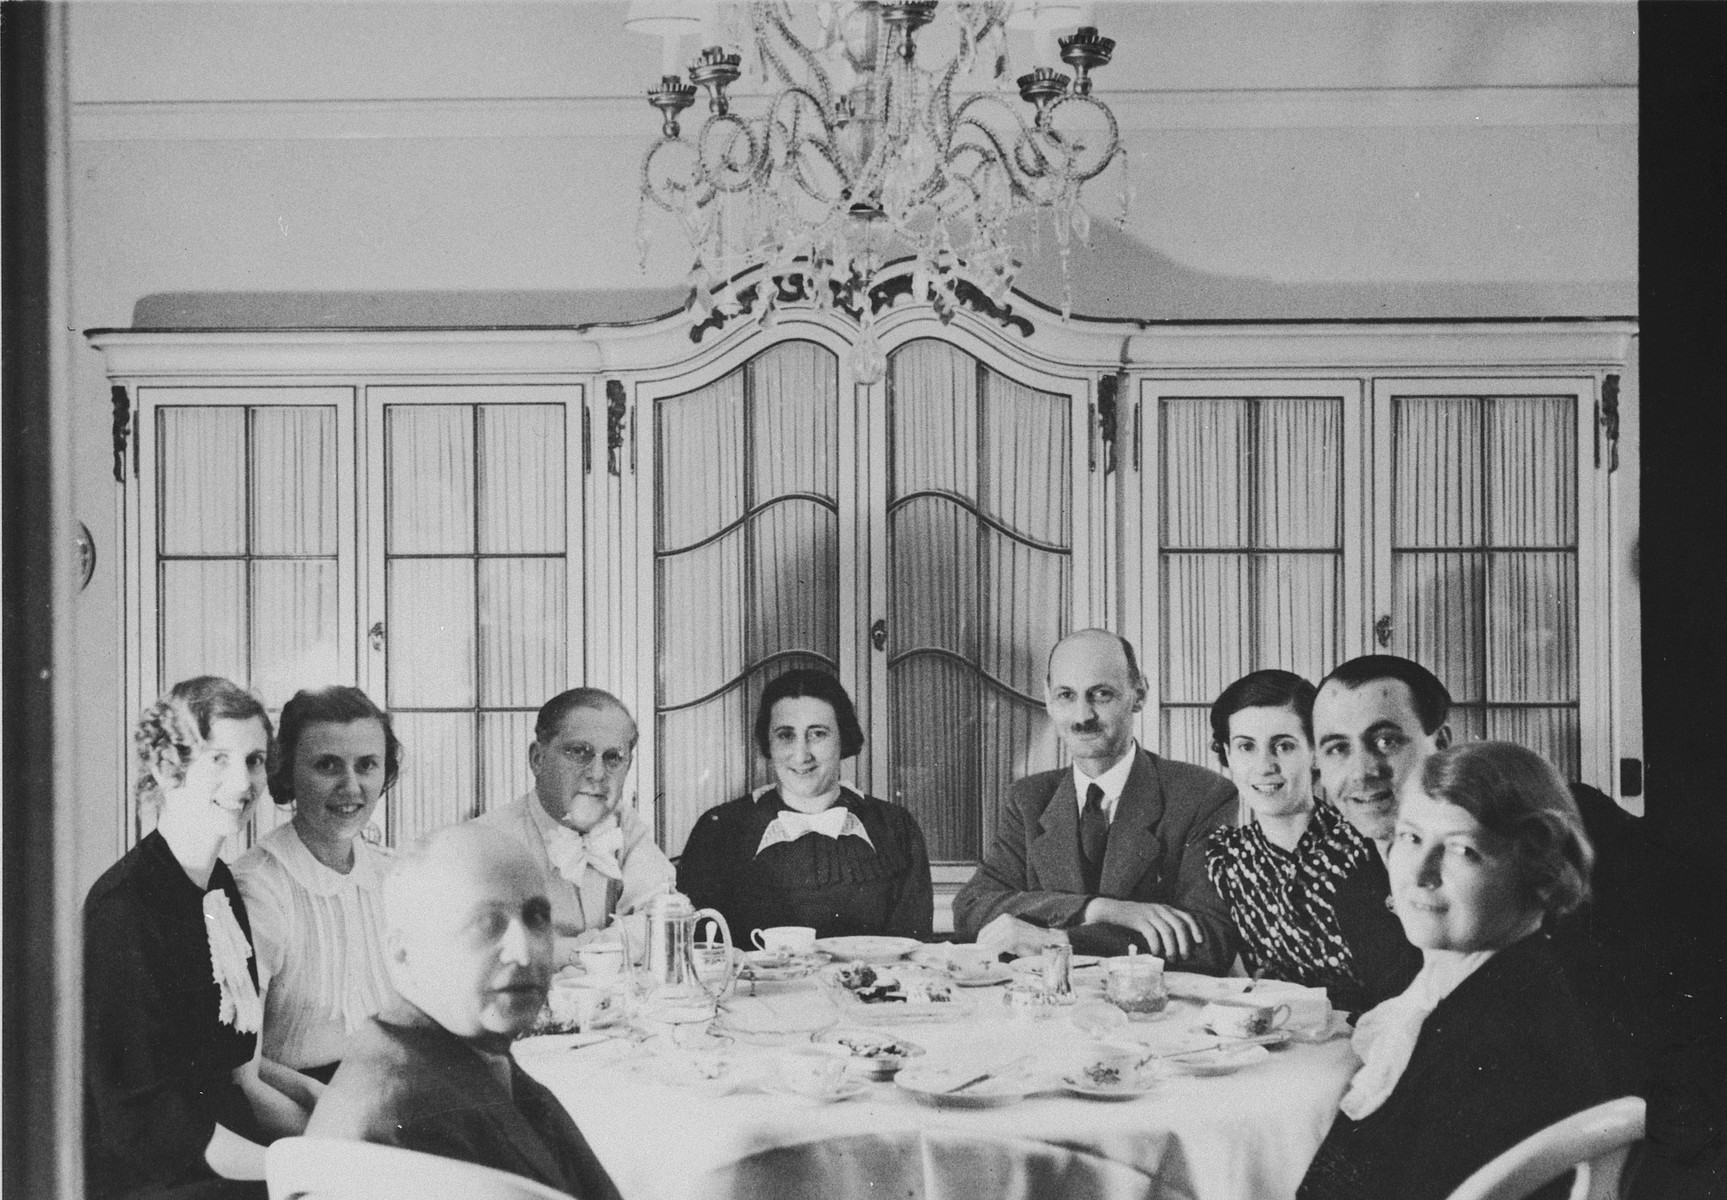 Jewish friends who have met for tea, including the parents of Anne Frank, pose around a table in a private home in Mannheim, Germany, shortly before many of them fled the country as refugees of the Nazi regime.

Pictured seated clockwise, from the front left, are Otto Kahn, Hildegarde (Koppel) Weinberger (sister of Annelies Kahn), Irene Kaufer, Dr. Richard Kahn, Edith Frank, Otto Frank, Annelies Kahn, (mother of Gabrielle Kahn and sister-in-law of Hildegard Weinberger) and two undidentified individuals.